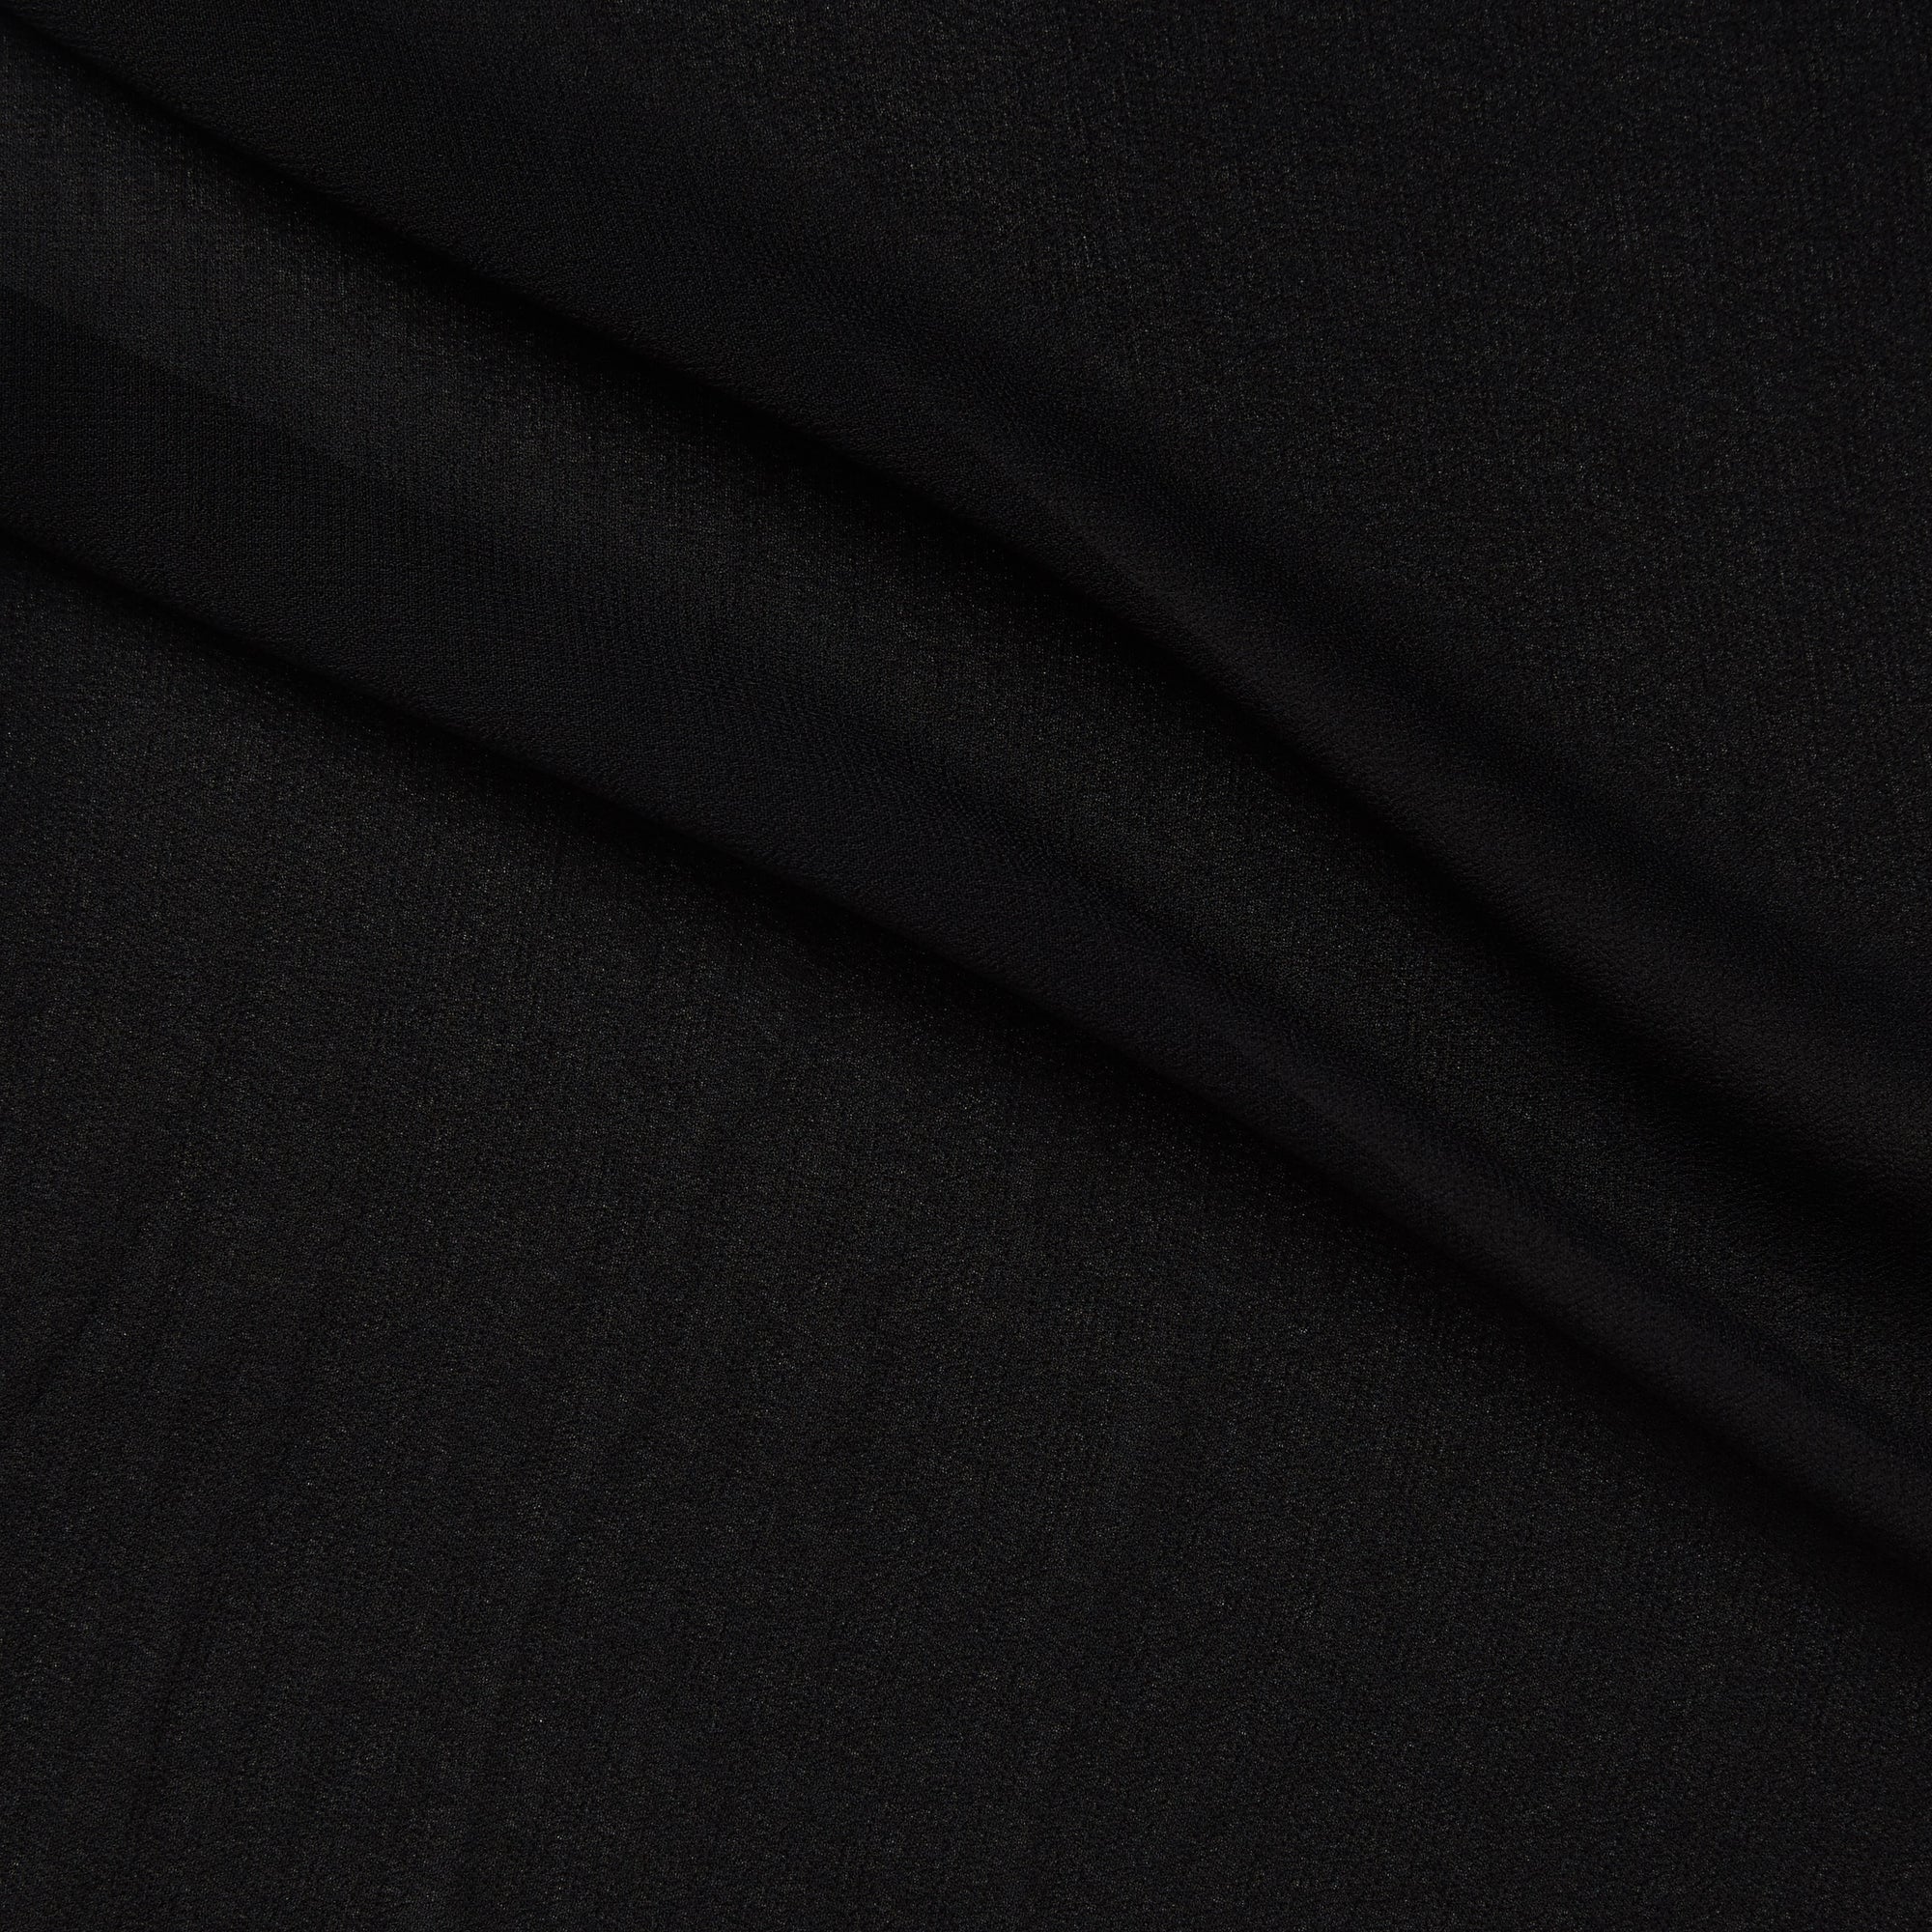 Chelsea black color version of a  double georgette pure viscose fabric with crinkled face and fluid drape